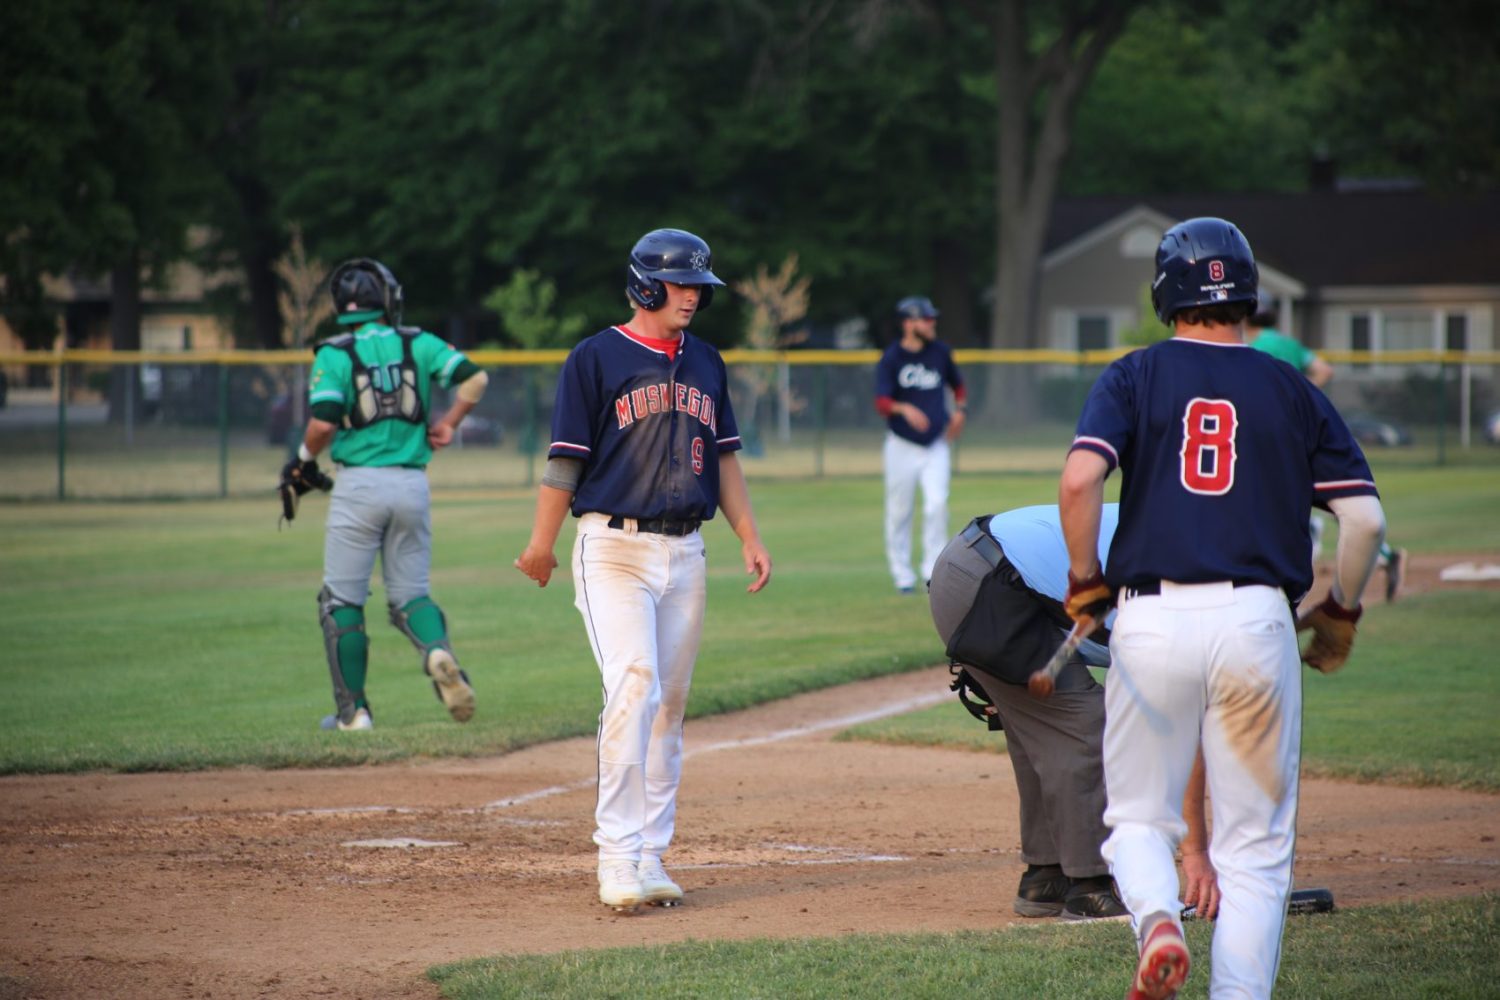 Muskegon Clippers still perfect at 5-0 after victory over Royal Oak Leprechauns